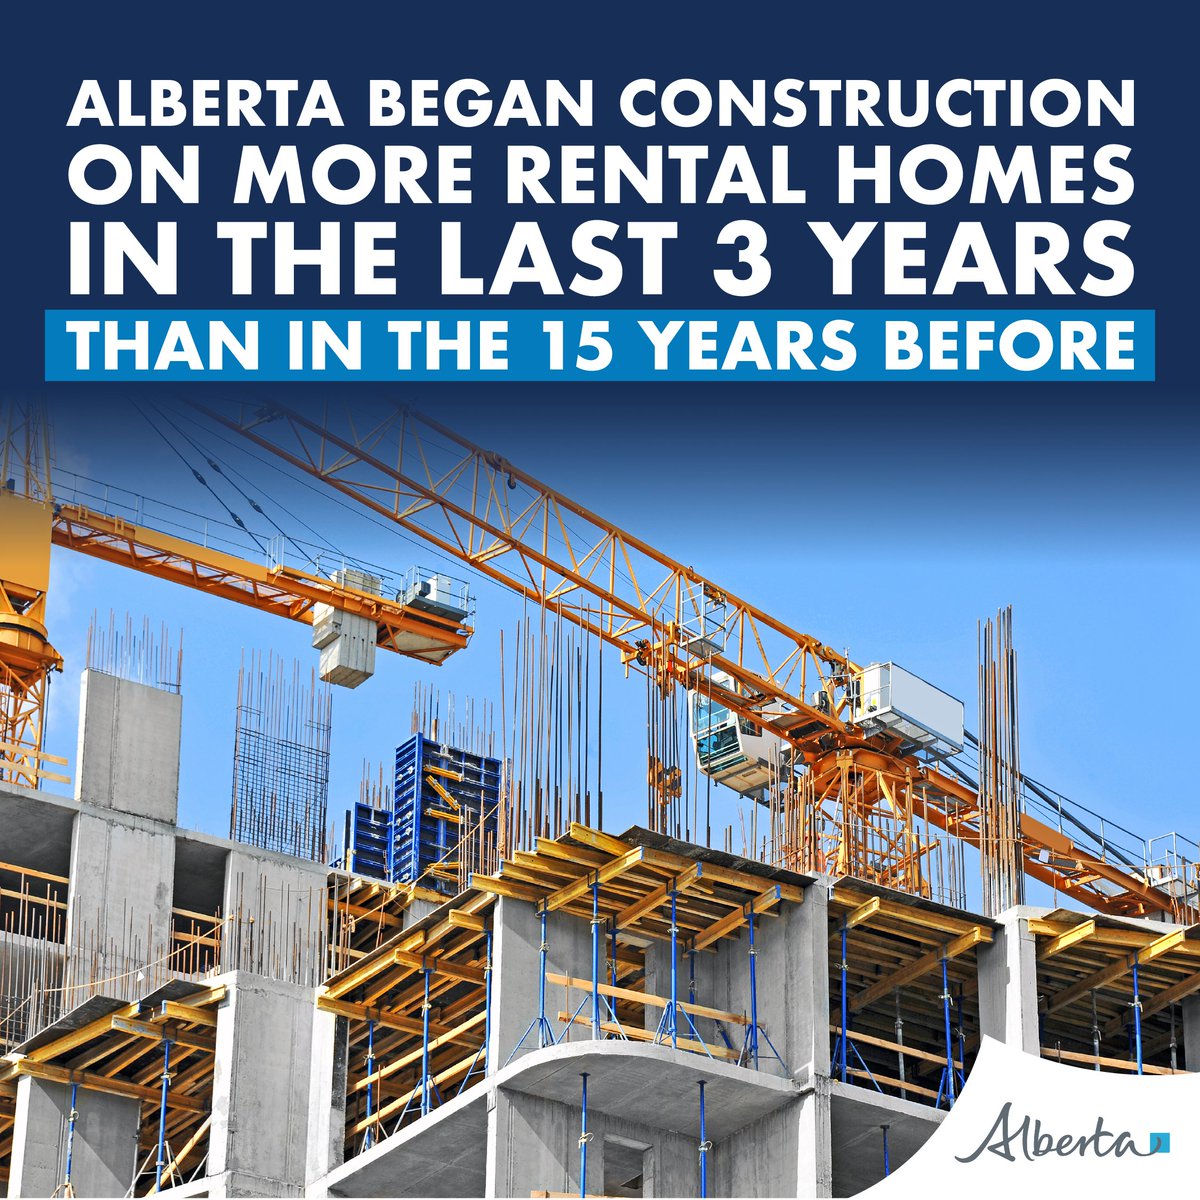 Alberta’s government is setting a pace for rapid rental construction! In the 3 years between 2021 - 2023, Alberta saw construction begin on more rental homes (25, 477) than in the 15 years between 2006 - 2020 combined. (25, 285)